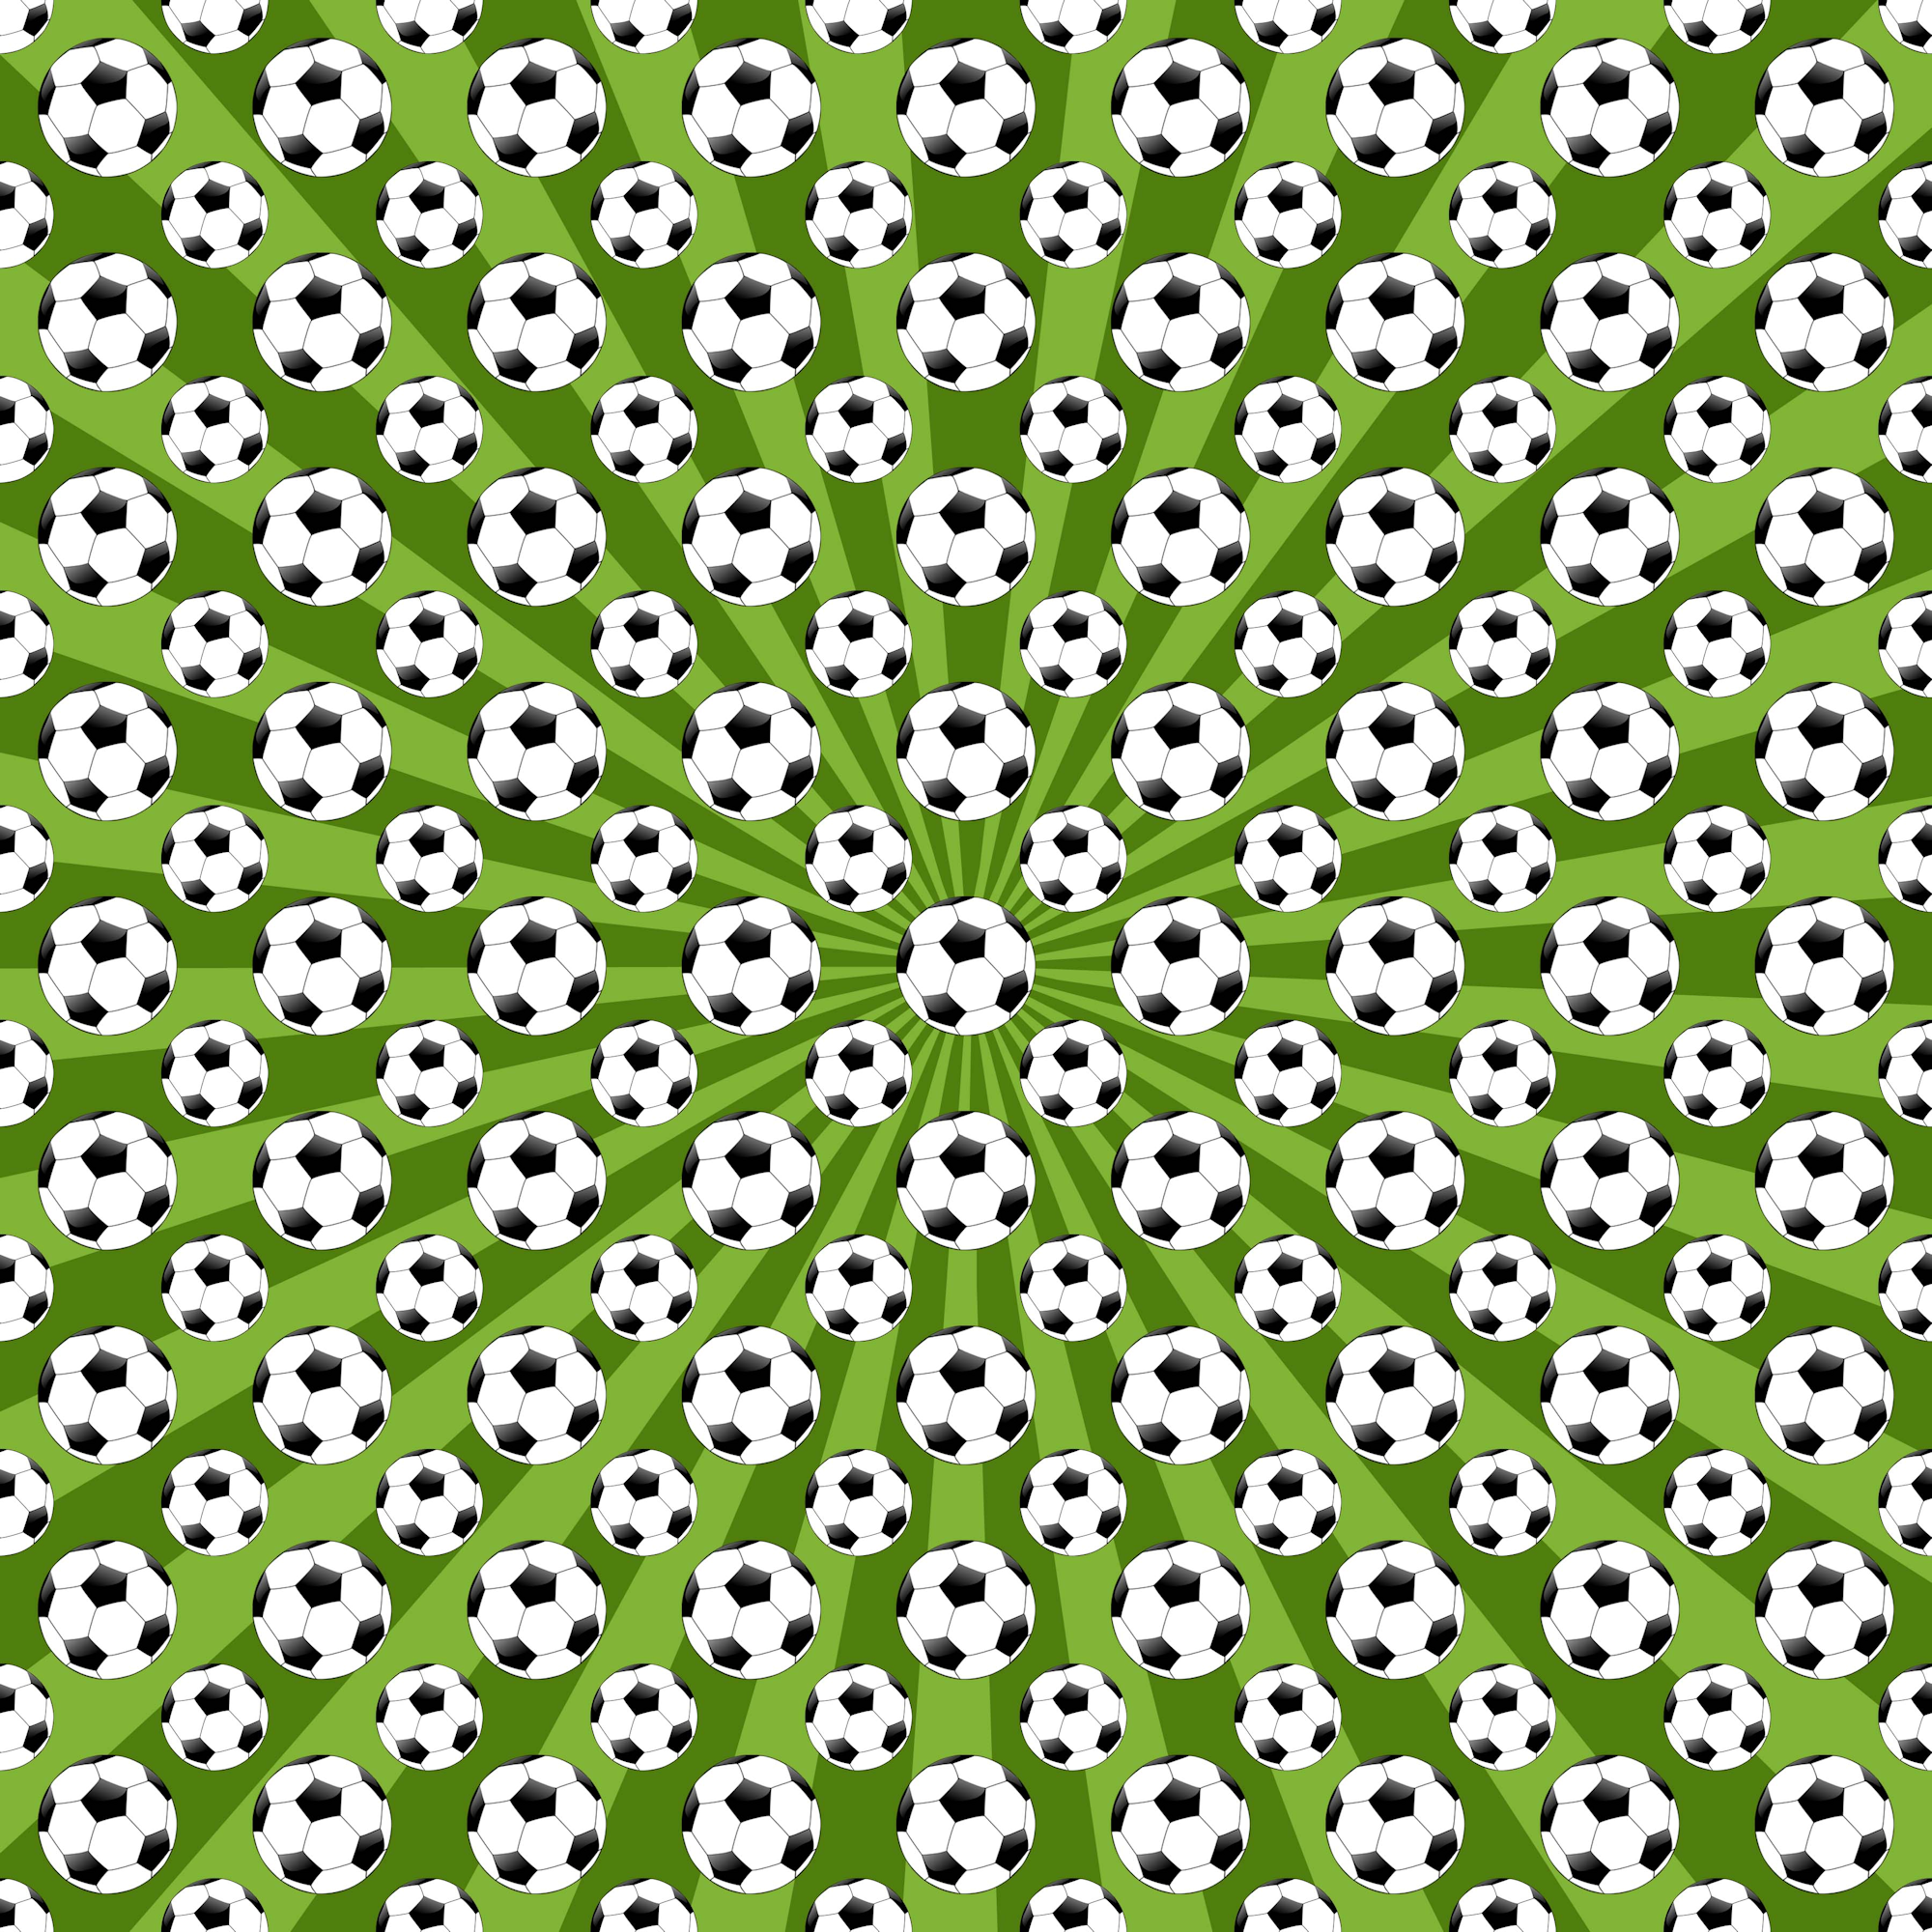 Sports Beat Collection Goal Line 12 x 12 Double-Sided Scrapbook Paper by SSC Designs